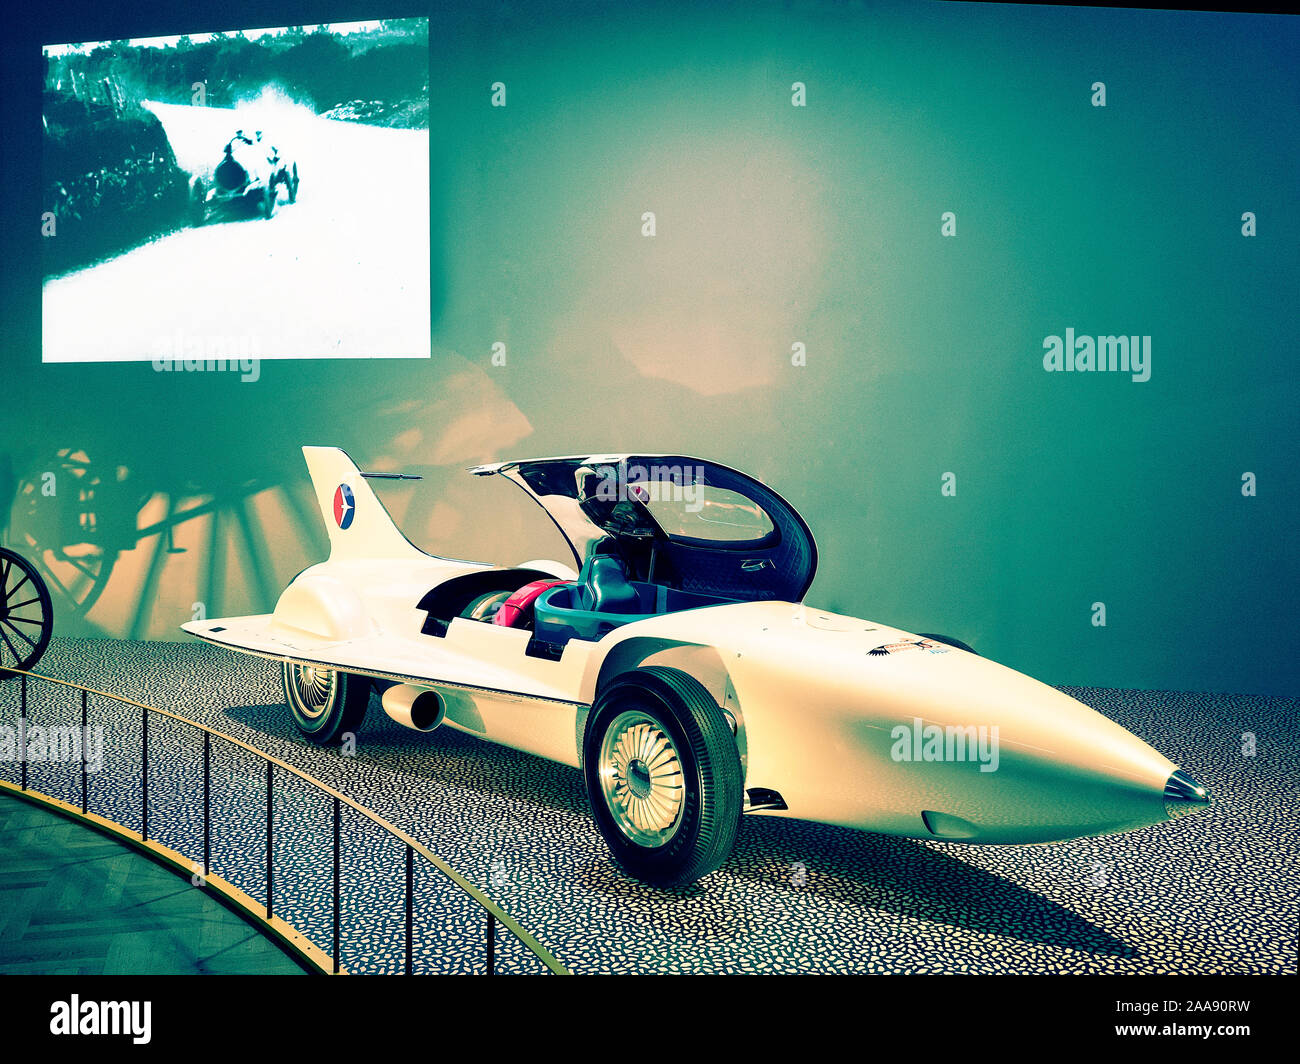 GM Firebird 1 concept car 1953. At the V&A Exhibition 'Cars Accelerating the Modern World. Stock Photo